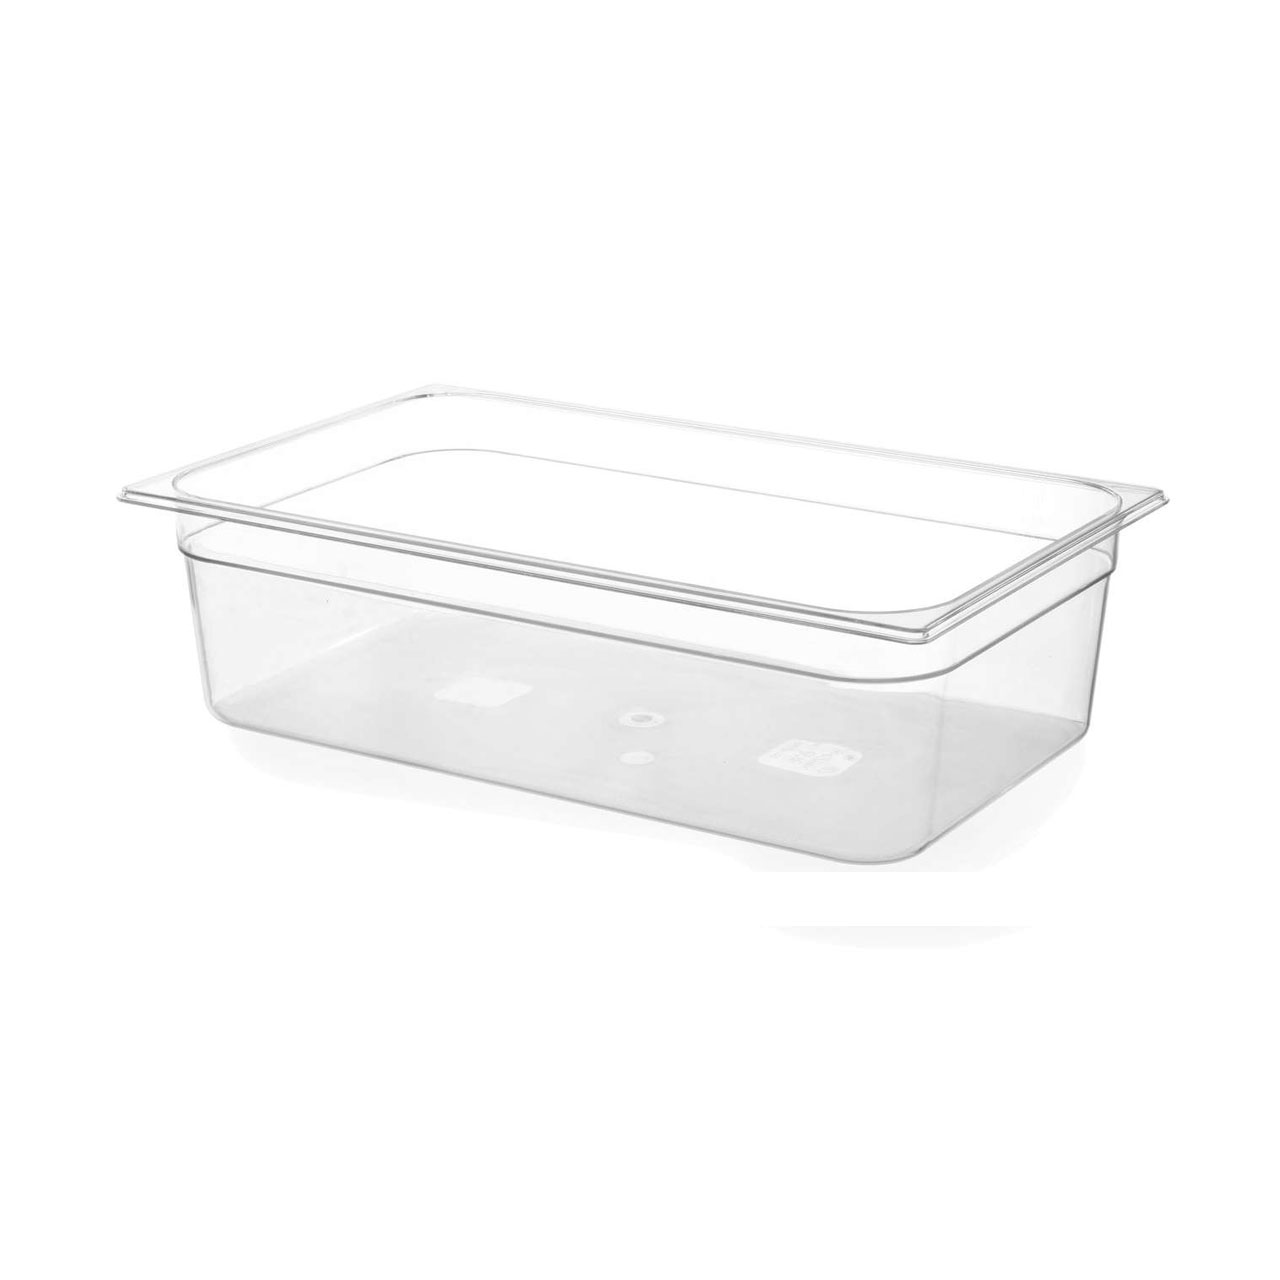 Ziva XLarge sous-vide container + lid